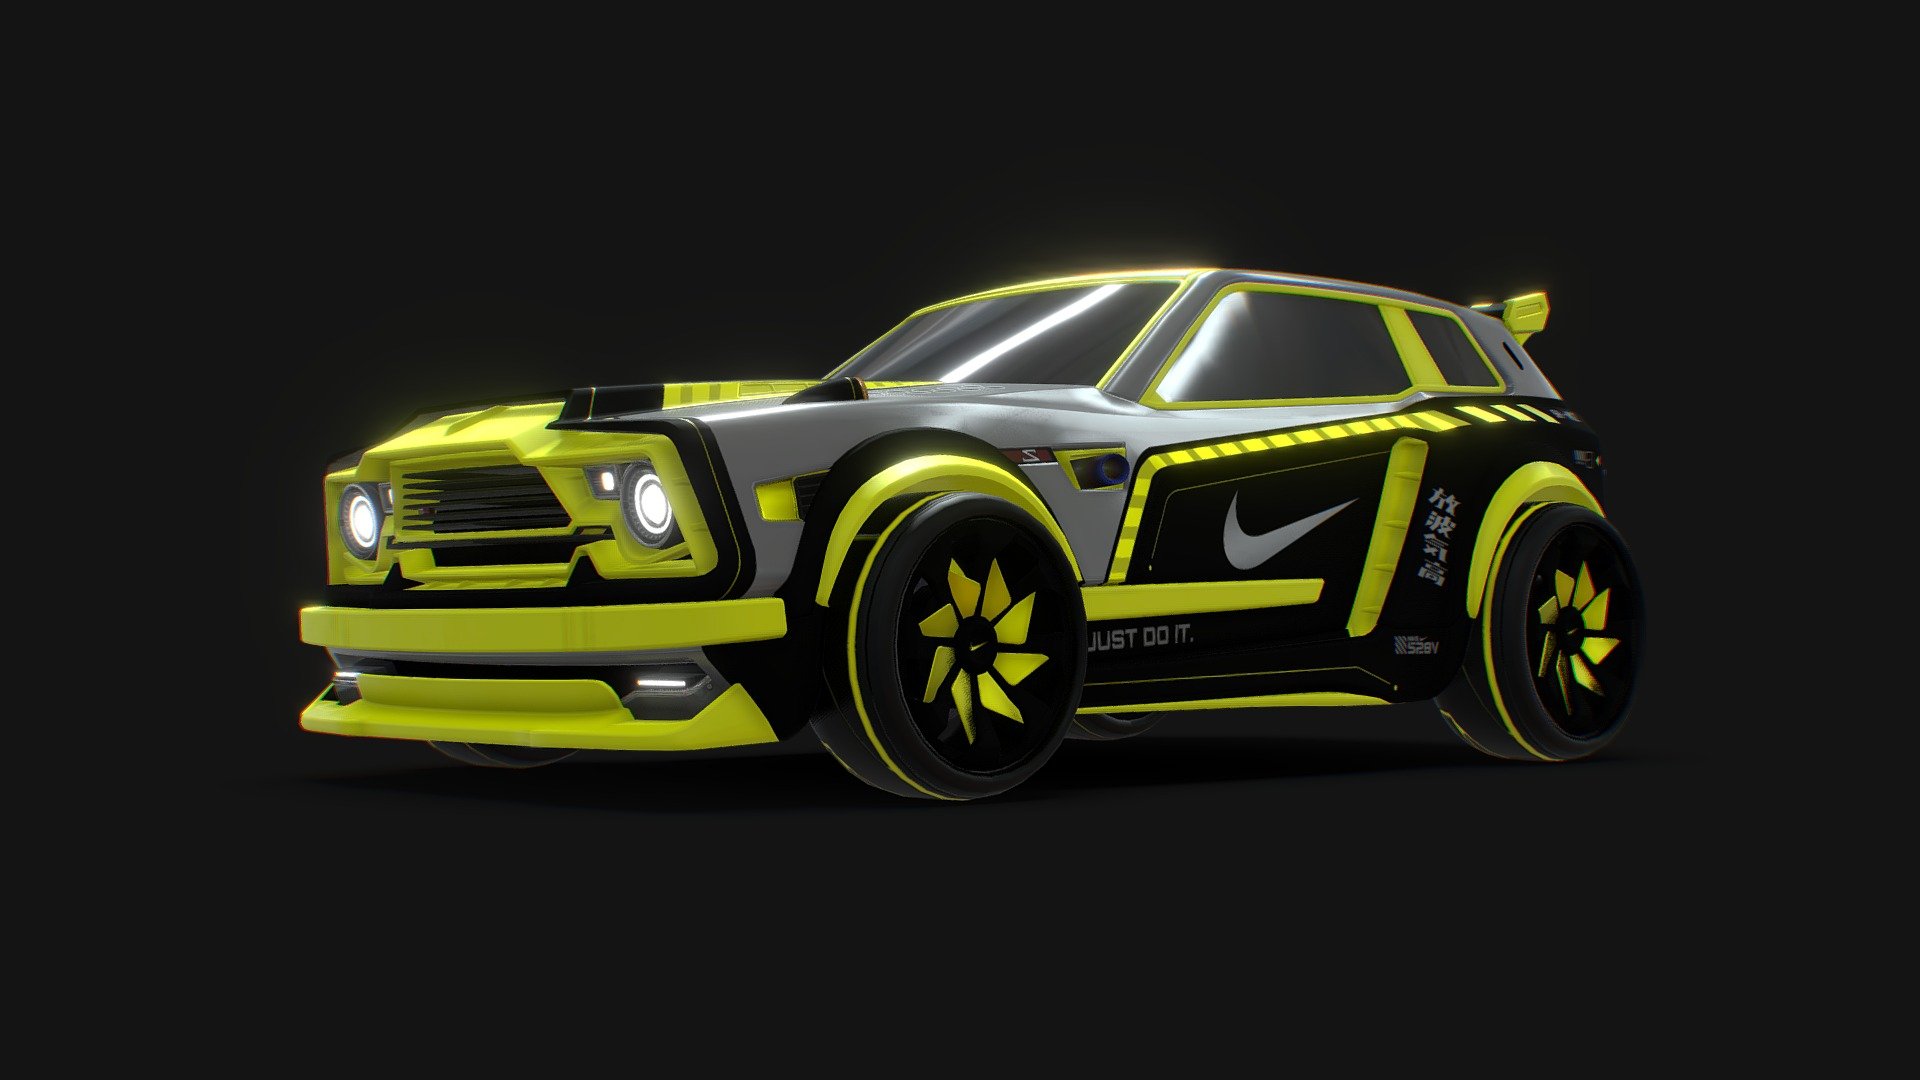 NIKE ONYX

Discover the ONYX skin for the Fennec model on Rocket League game. 

Find the other Nike Esport Shop skins on my profile.

Disclaimer : Nike Esport Shop is a fictional project that consists of imagining the future skins made by the equipment manufacturer NIKE in various major esports games.

Socials networks : 



Twitter : https://twitter.com/peiksprod



Instagram : https://www.instagram.com/peiksprod



Youtube : https://www.youtube.com/c/PeiksProd



Behance : https://www.behance.net/peiksprod


 - NIKE ONYX - Fennec (Rocket League) - 3D model by peiks 3d model